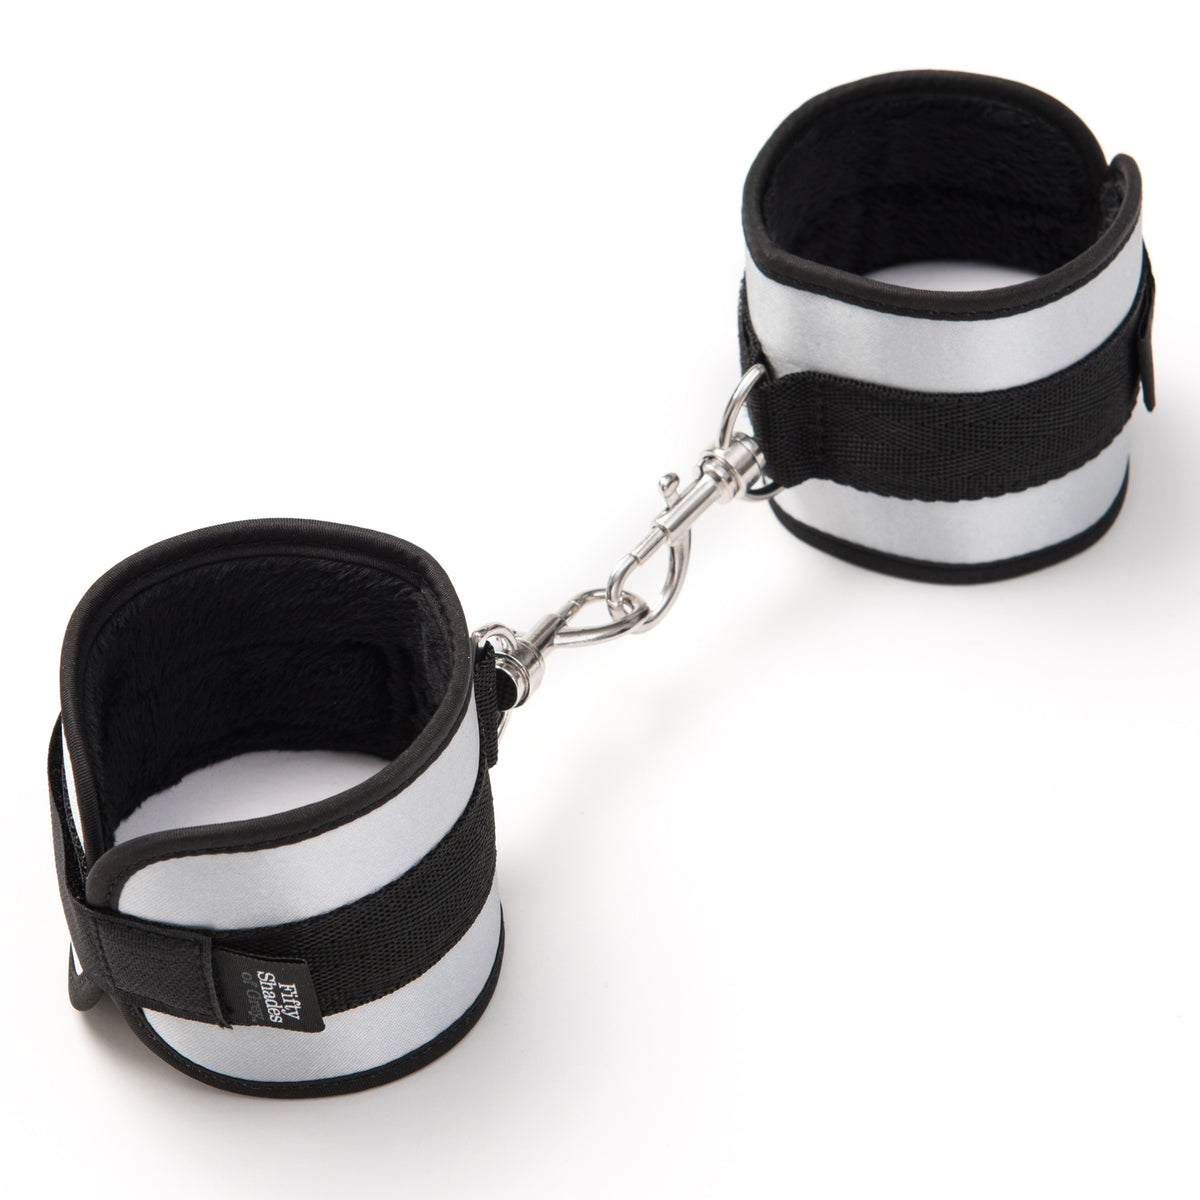 Fifty Shades of Grey® Totally His Soft Handcuffs